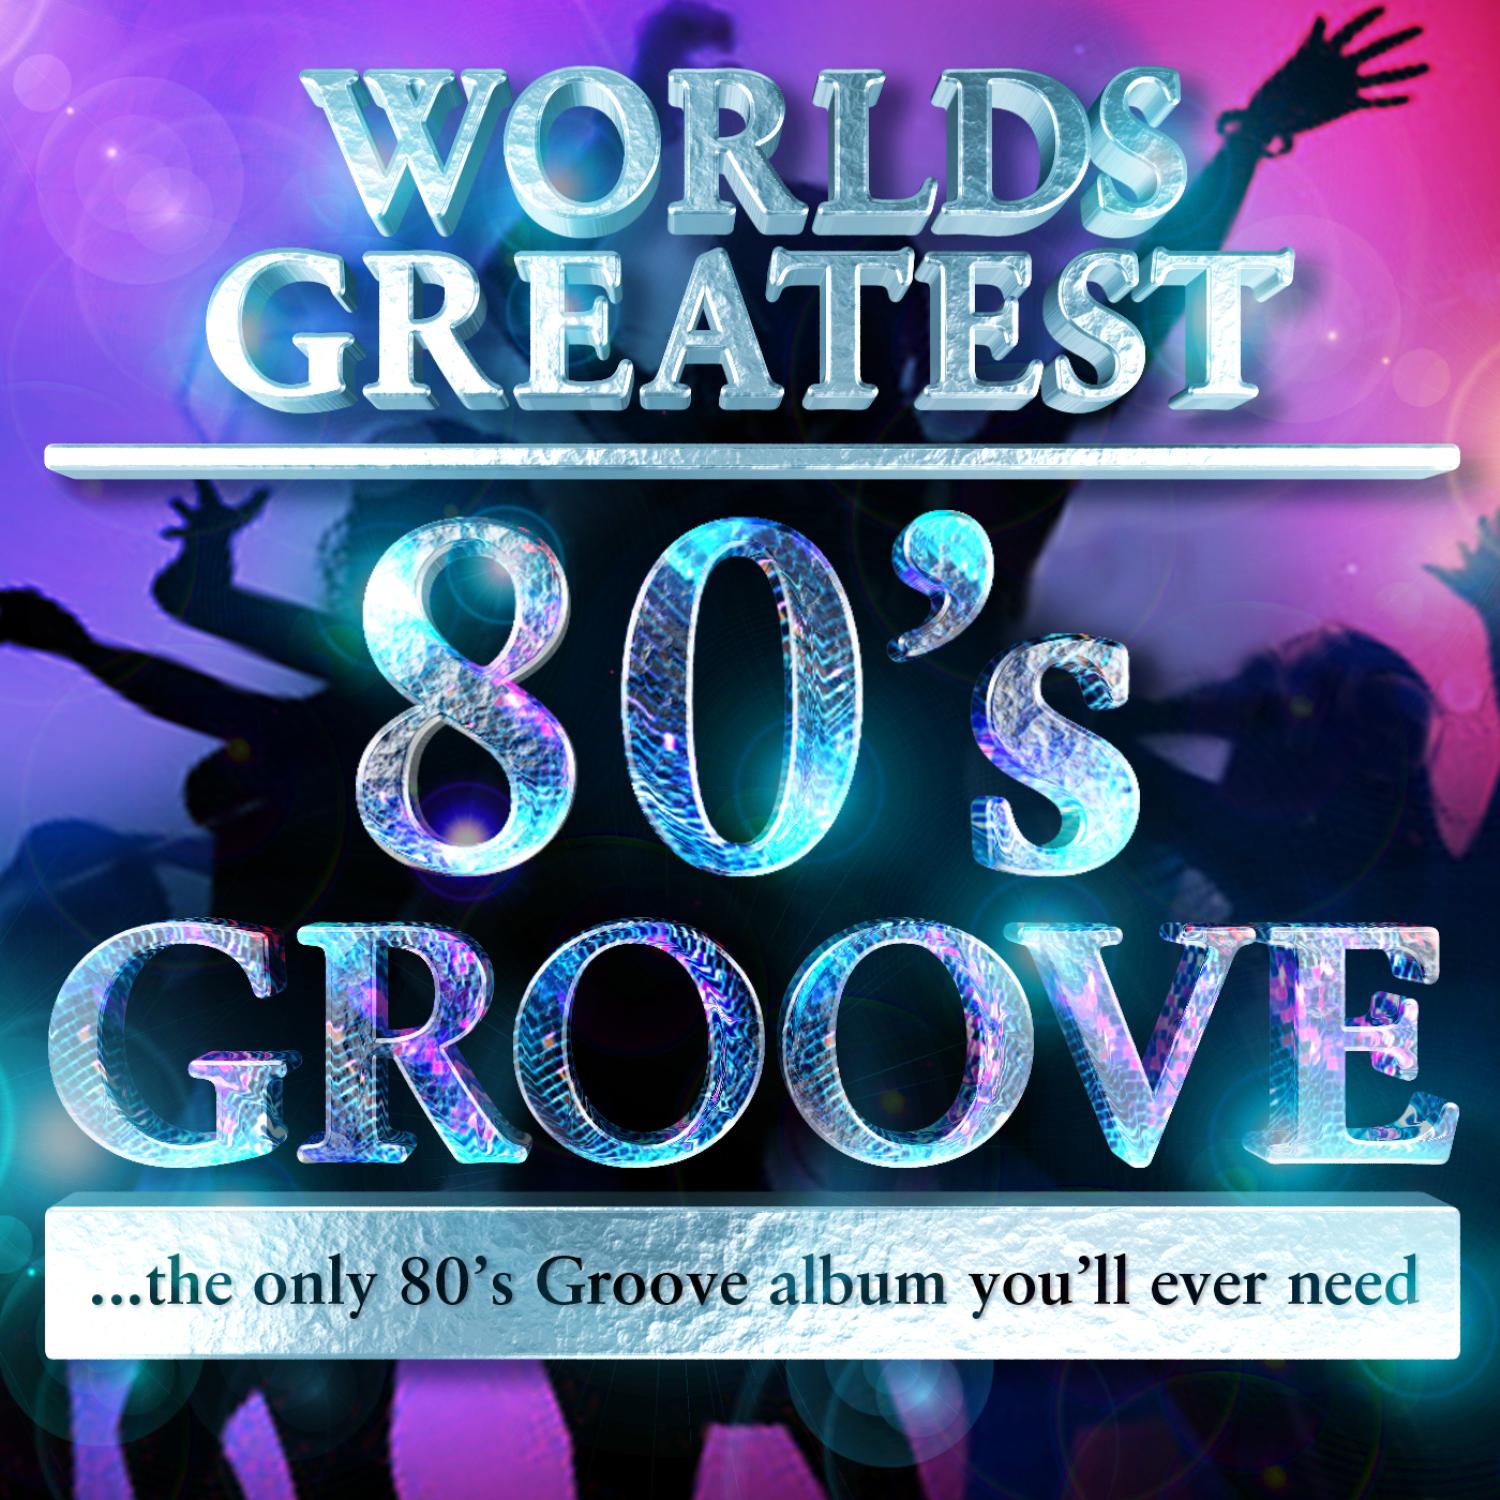 40 - Worlds Greatest 80's Groove Hits - the only 80's Groove album you'll ever need